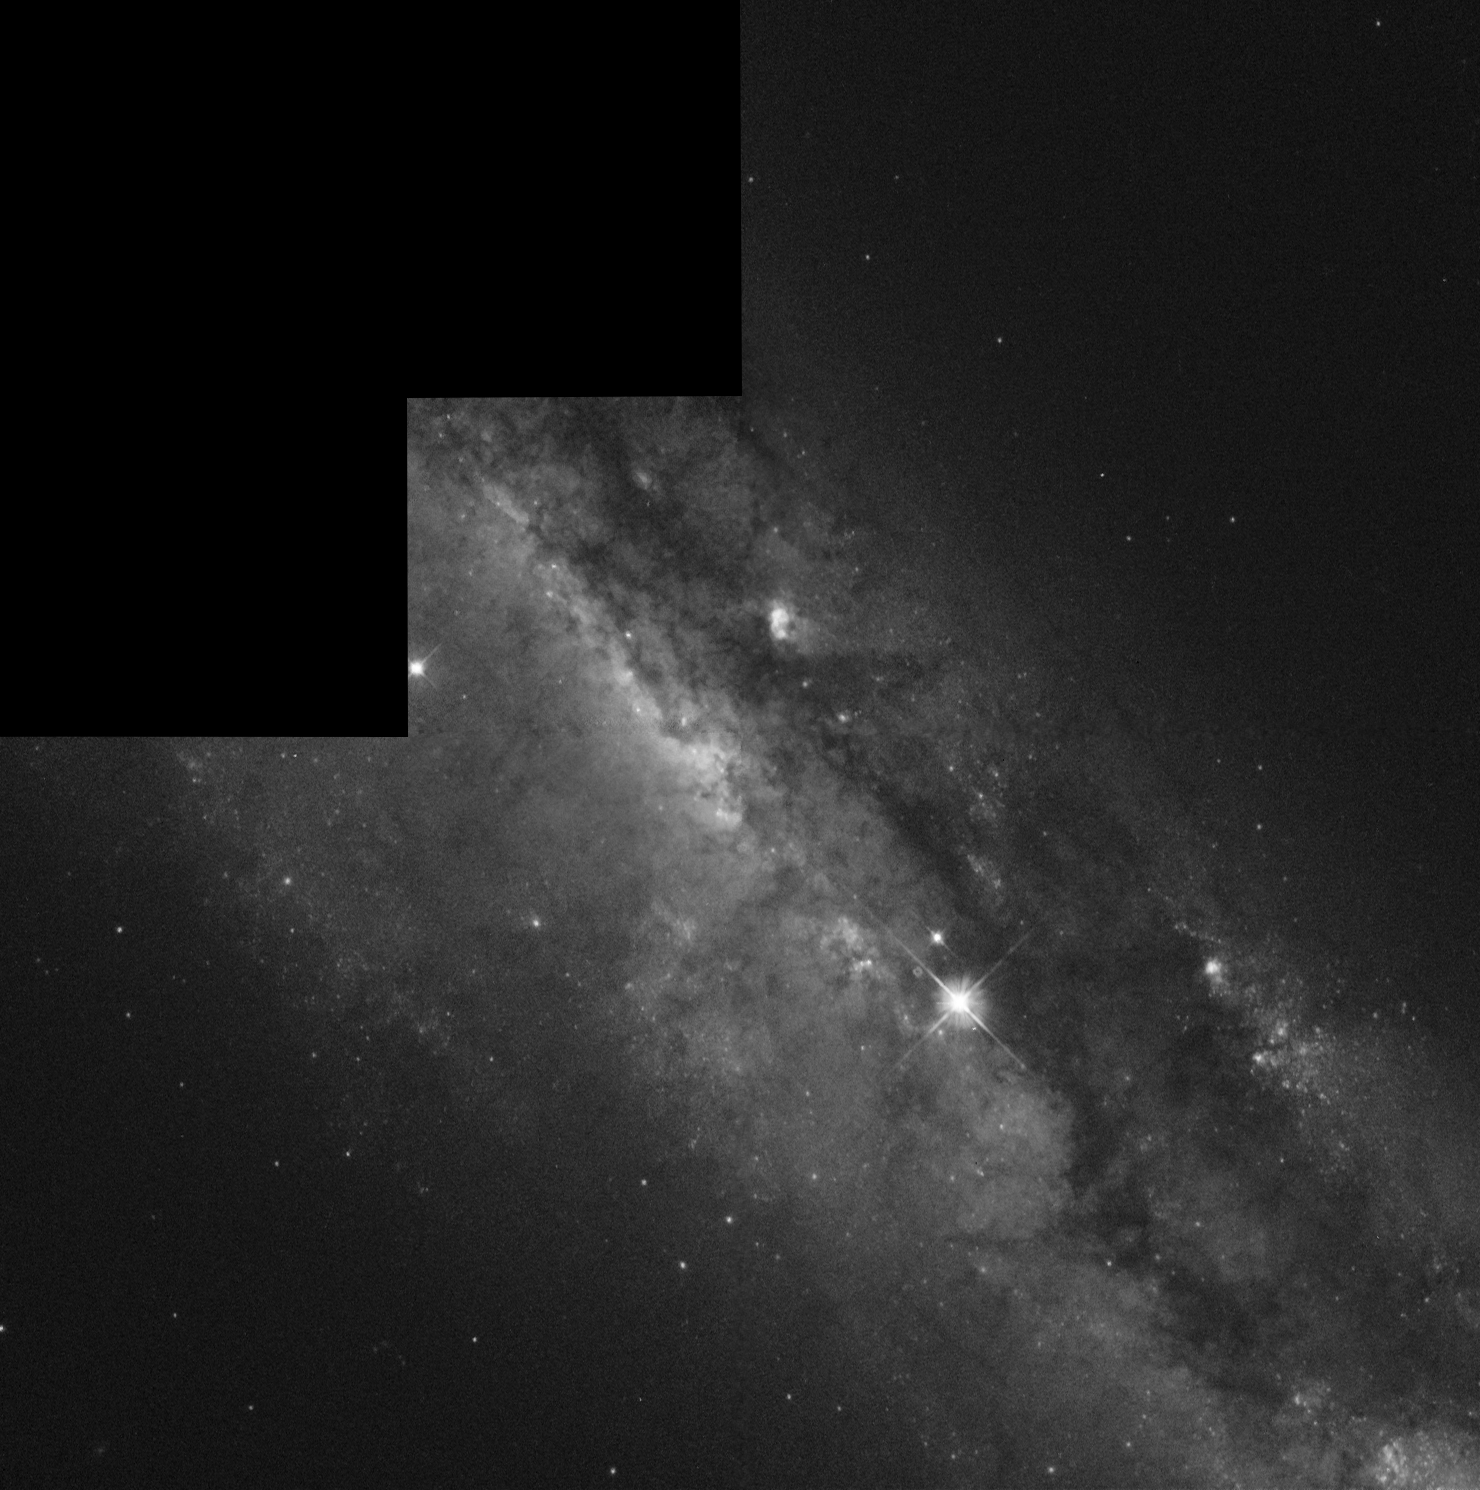 A grayscale image of a galaxy core surrounded by spiral arms laced through with dark dust. A black stair-step shaped region designates where there is no Hubble data.